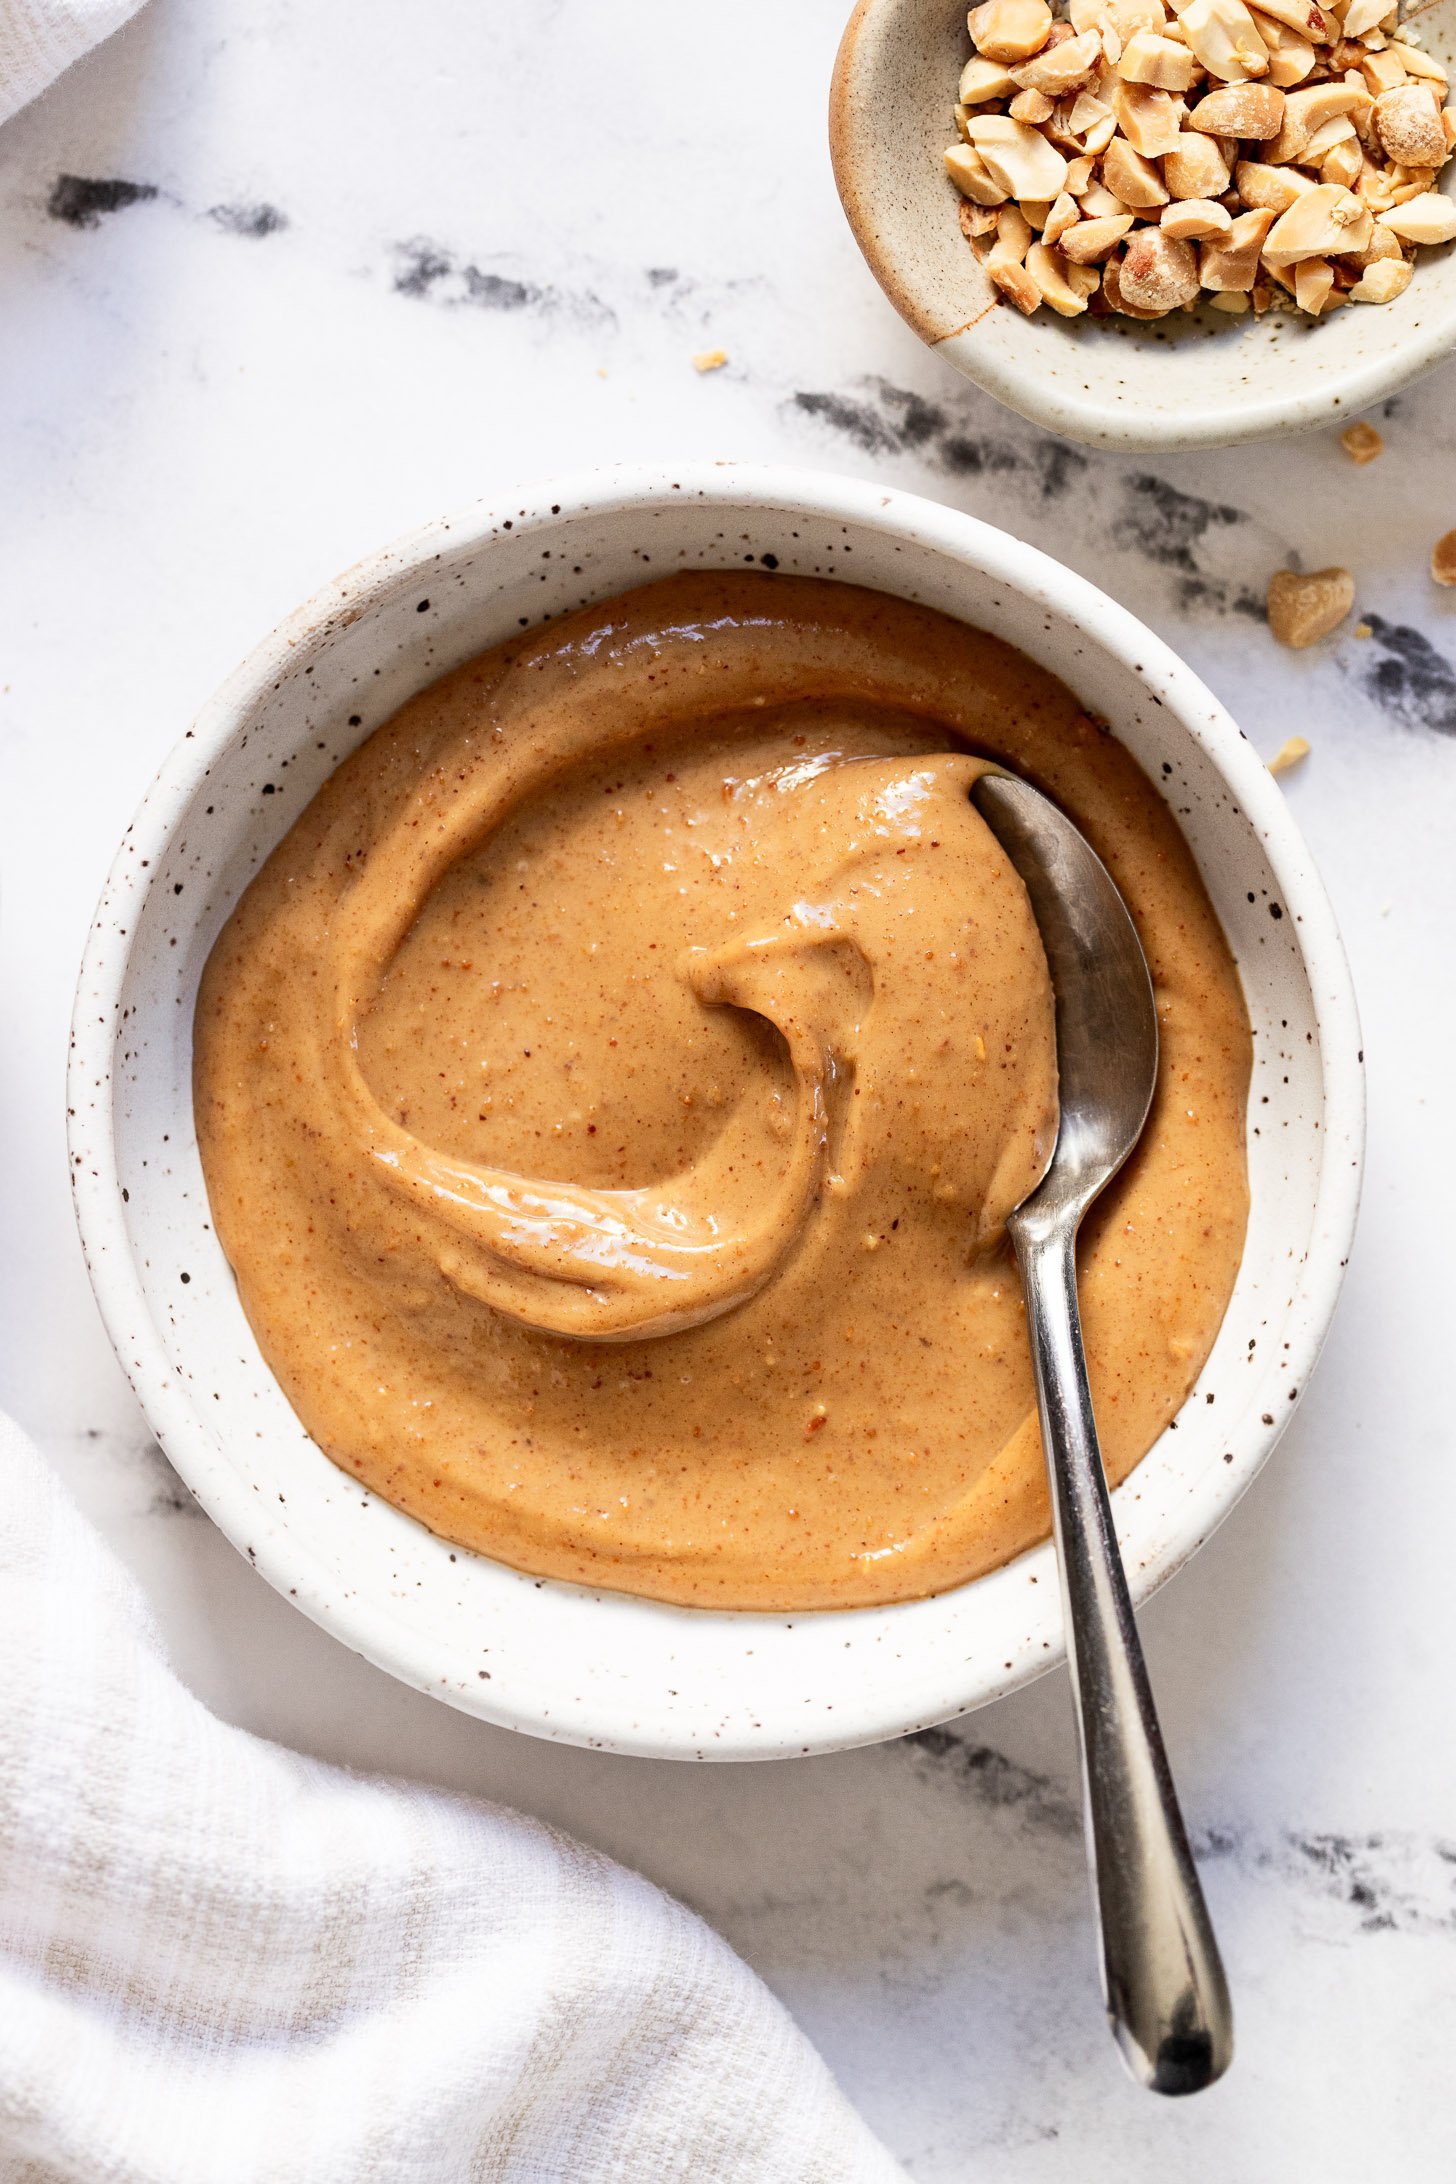 Bowl of peanut butter snack dip with spoon.